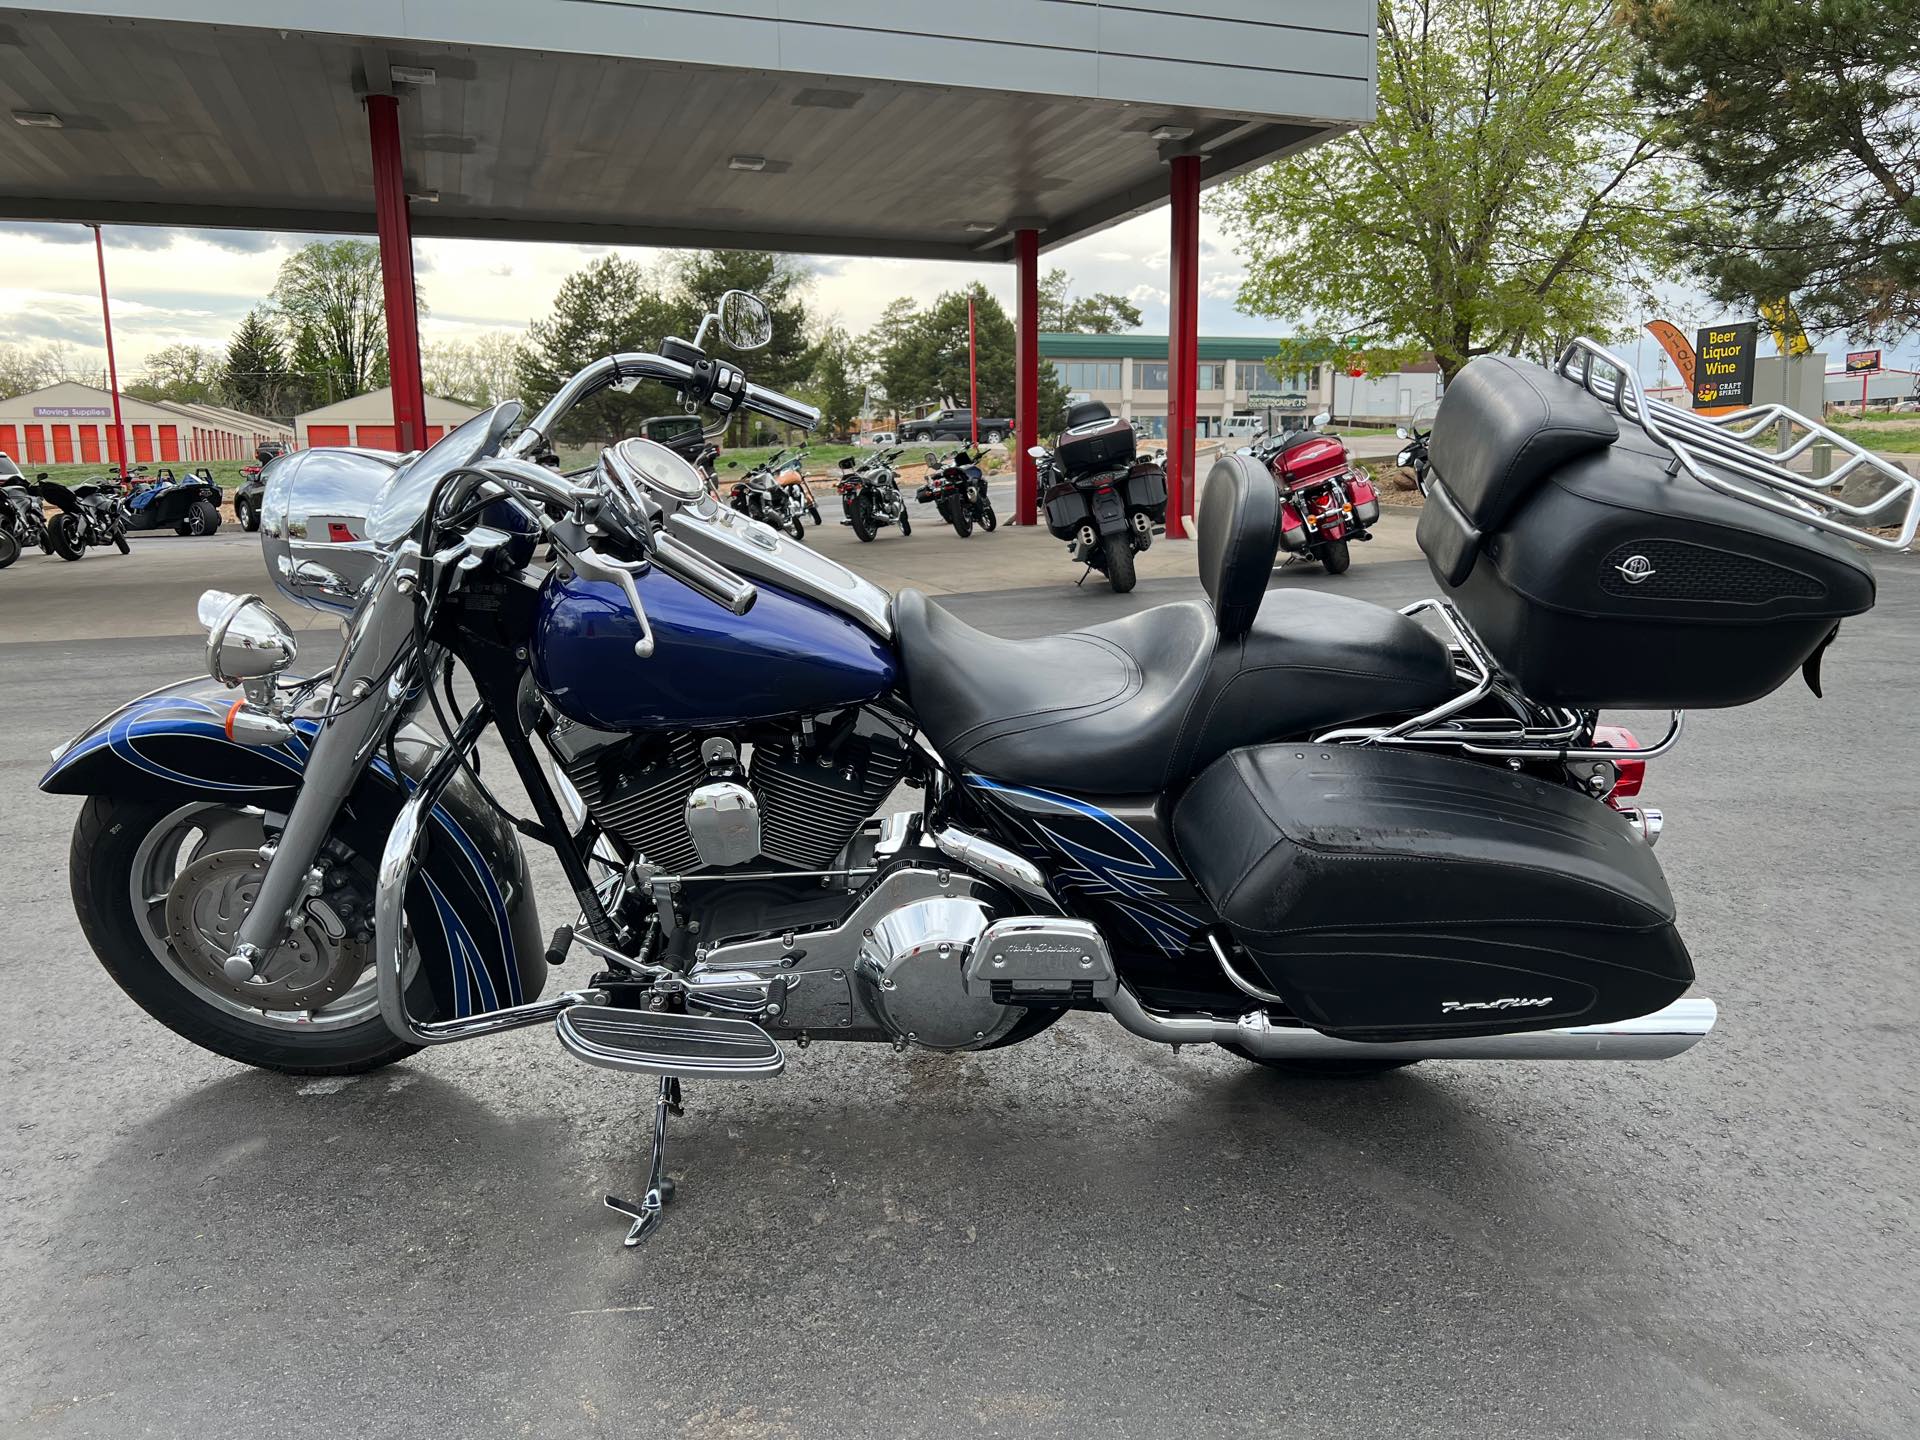 2006 Harley-Davidson Road King Custom at Aces Motorcycles - Fort Collins